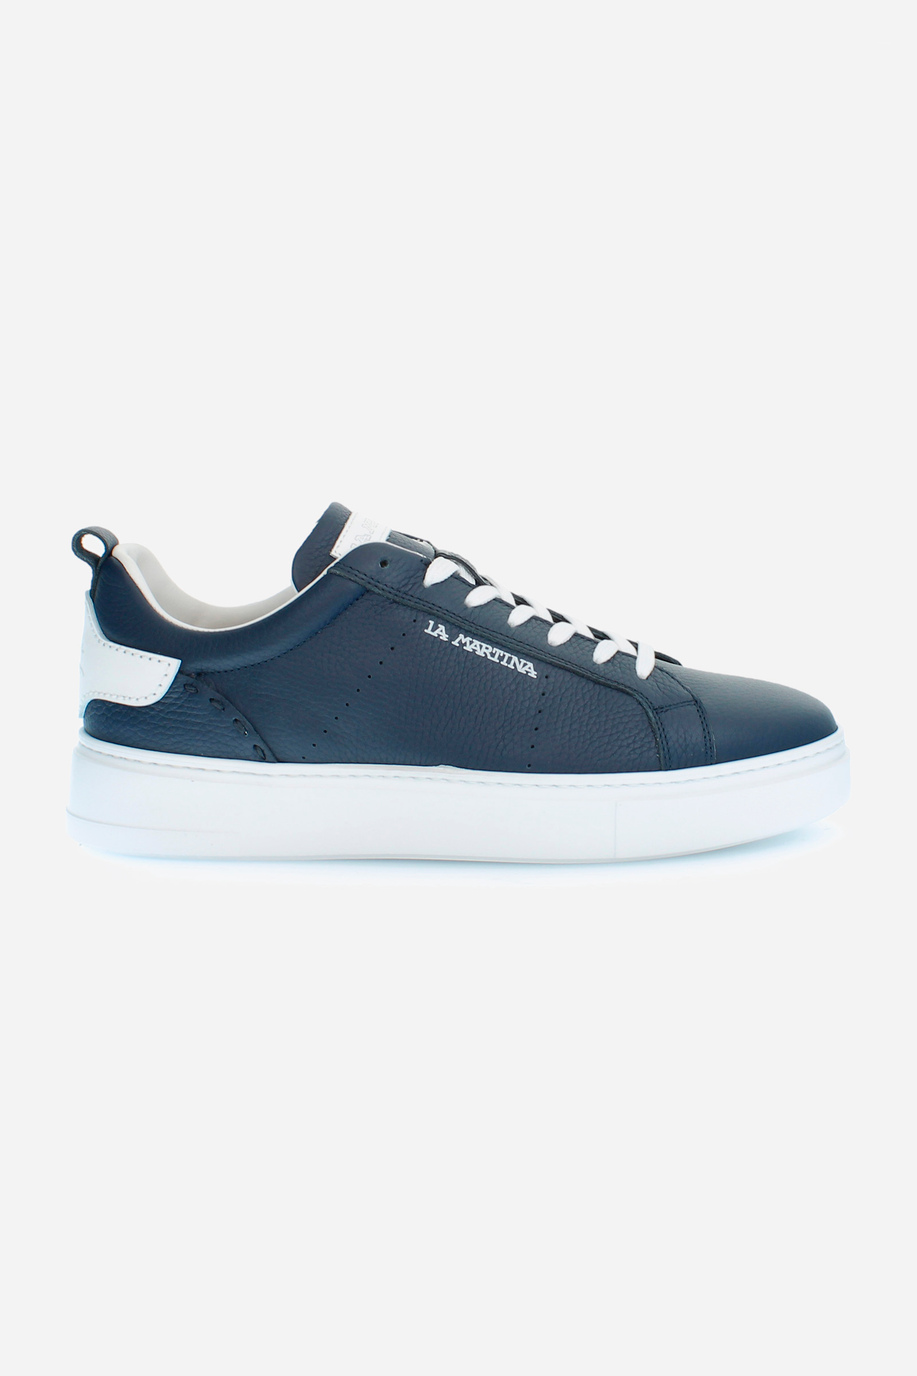 Men's leather trainers - Shoes and Accessories | La Martina - Official Online Shop